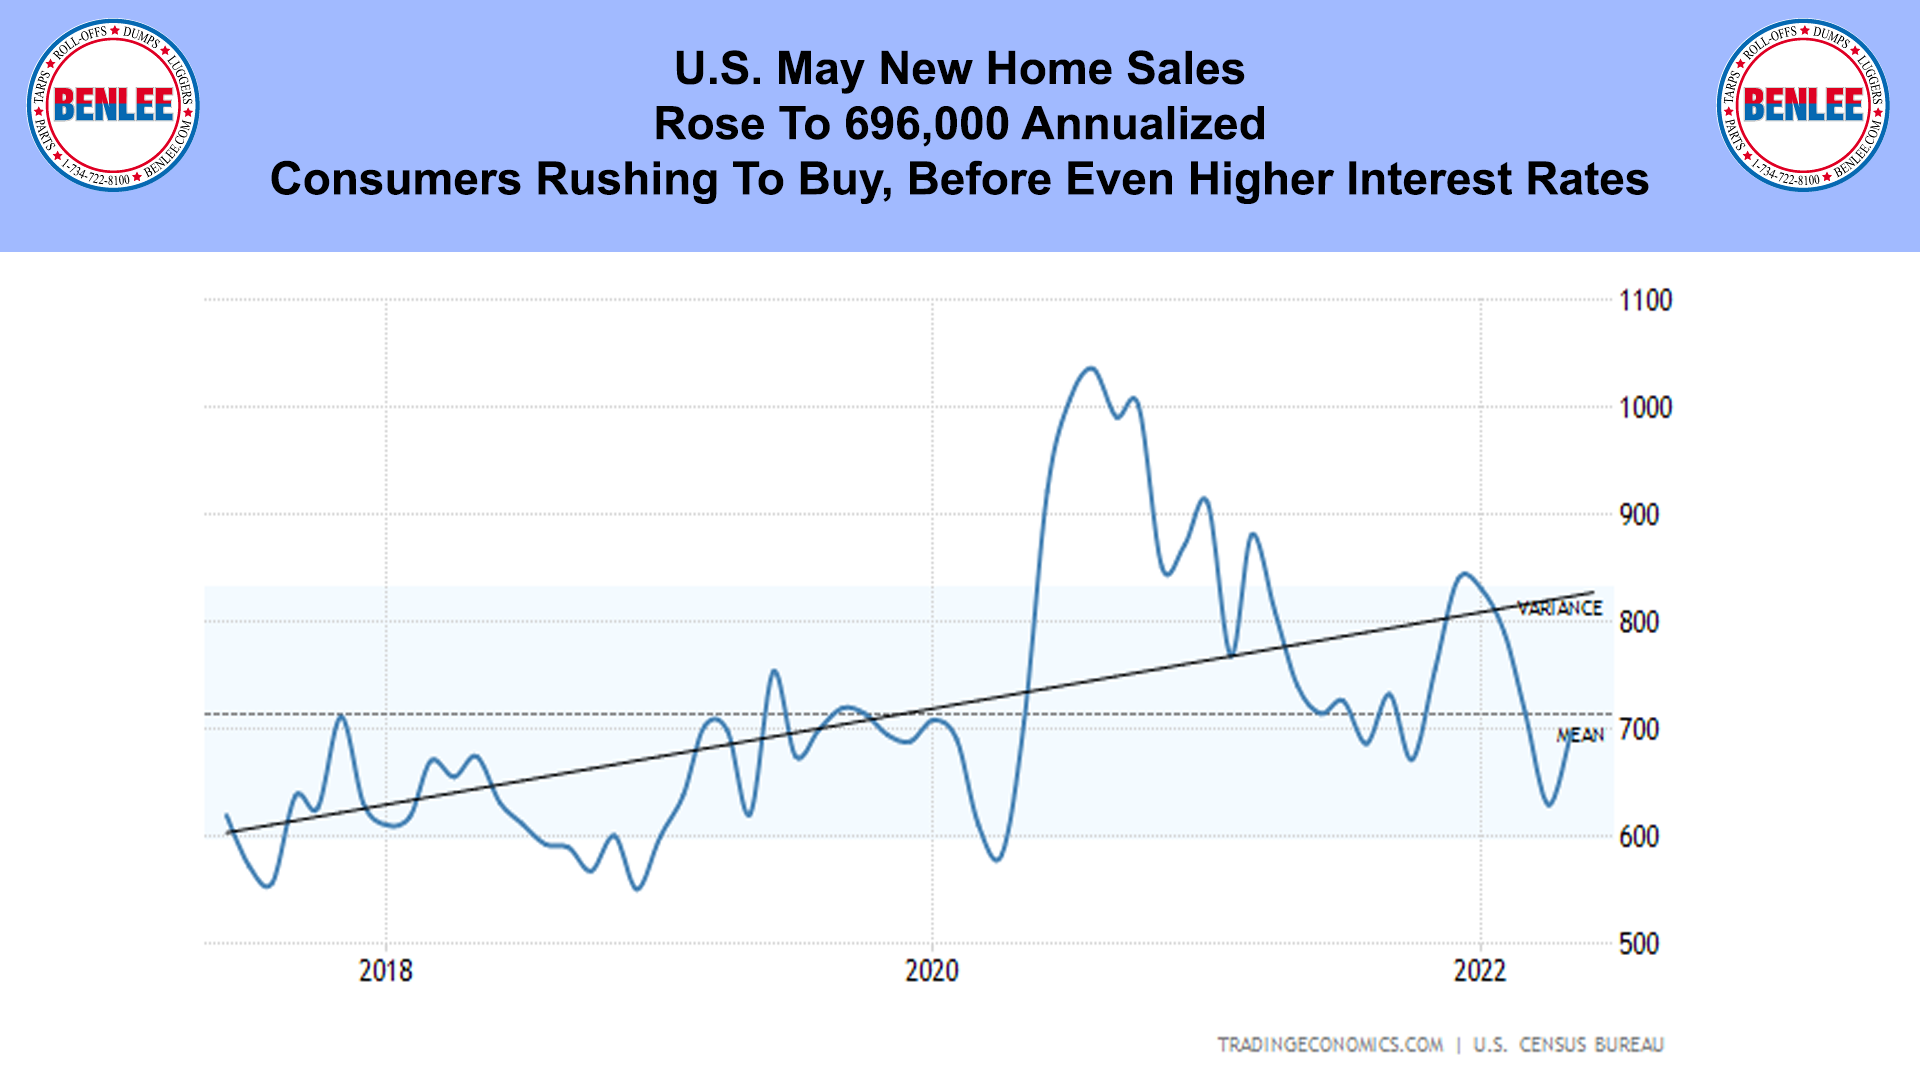 U.S. May New Home Sales